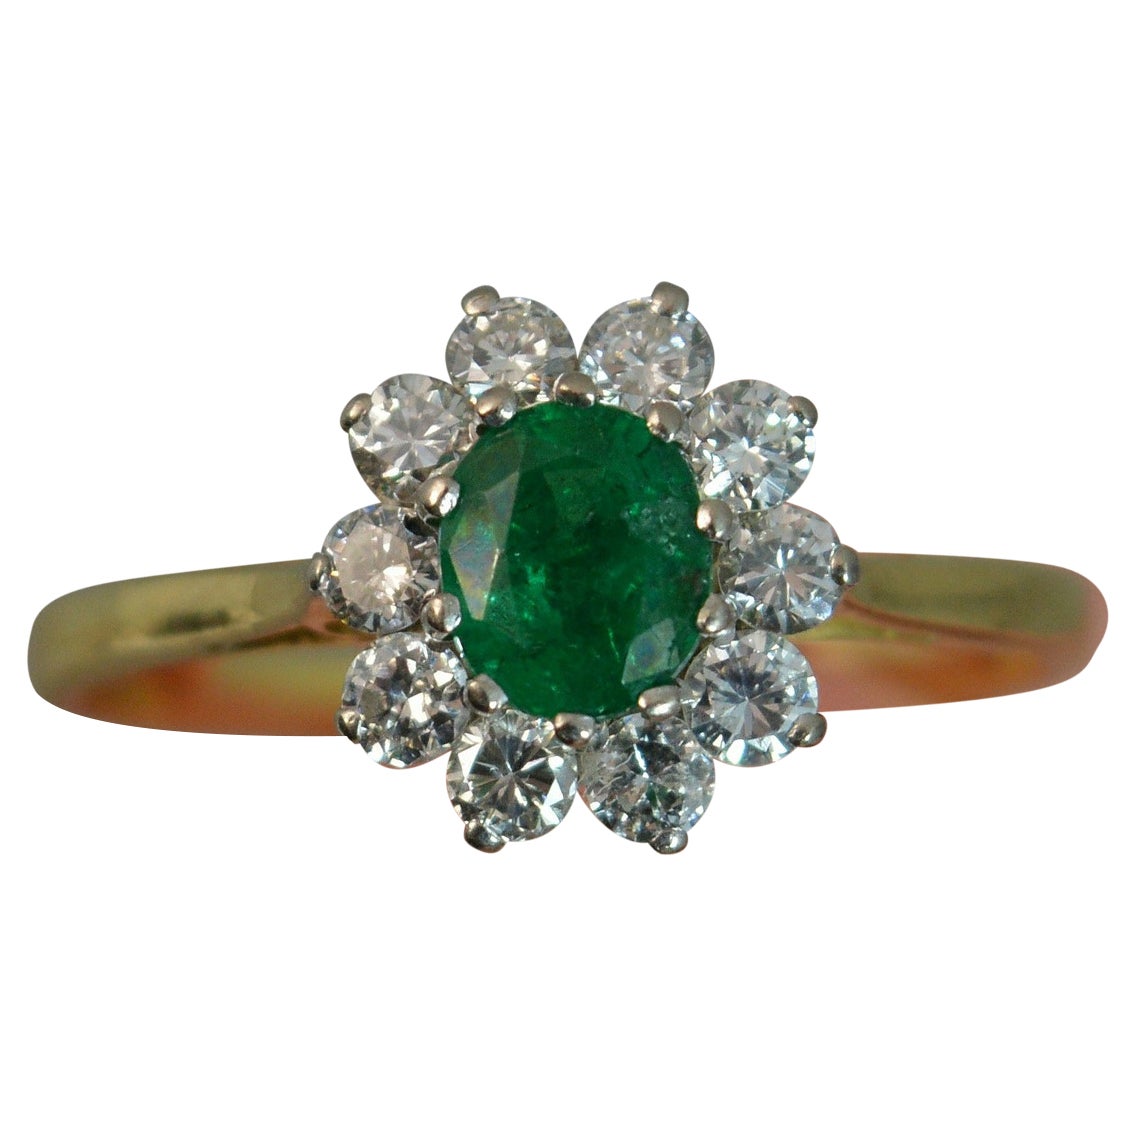 English Emerald and Diamond 18k Gold Cluster Ring, Early 20th Century ...